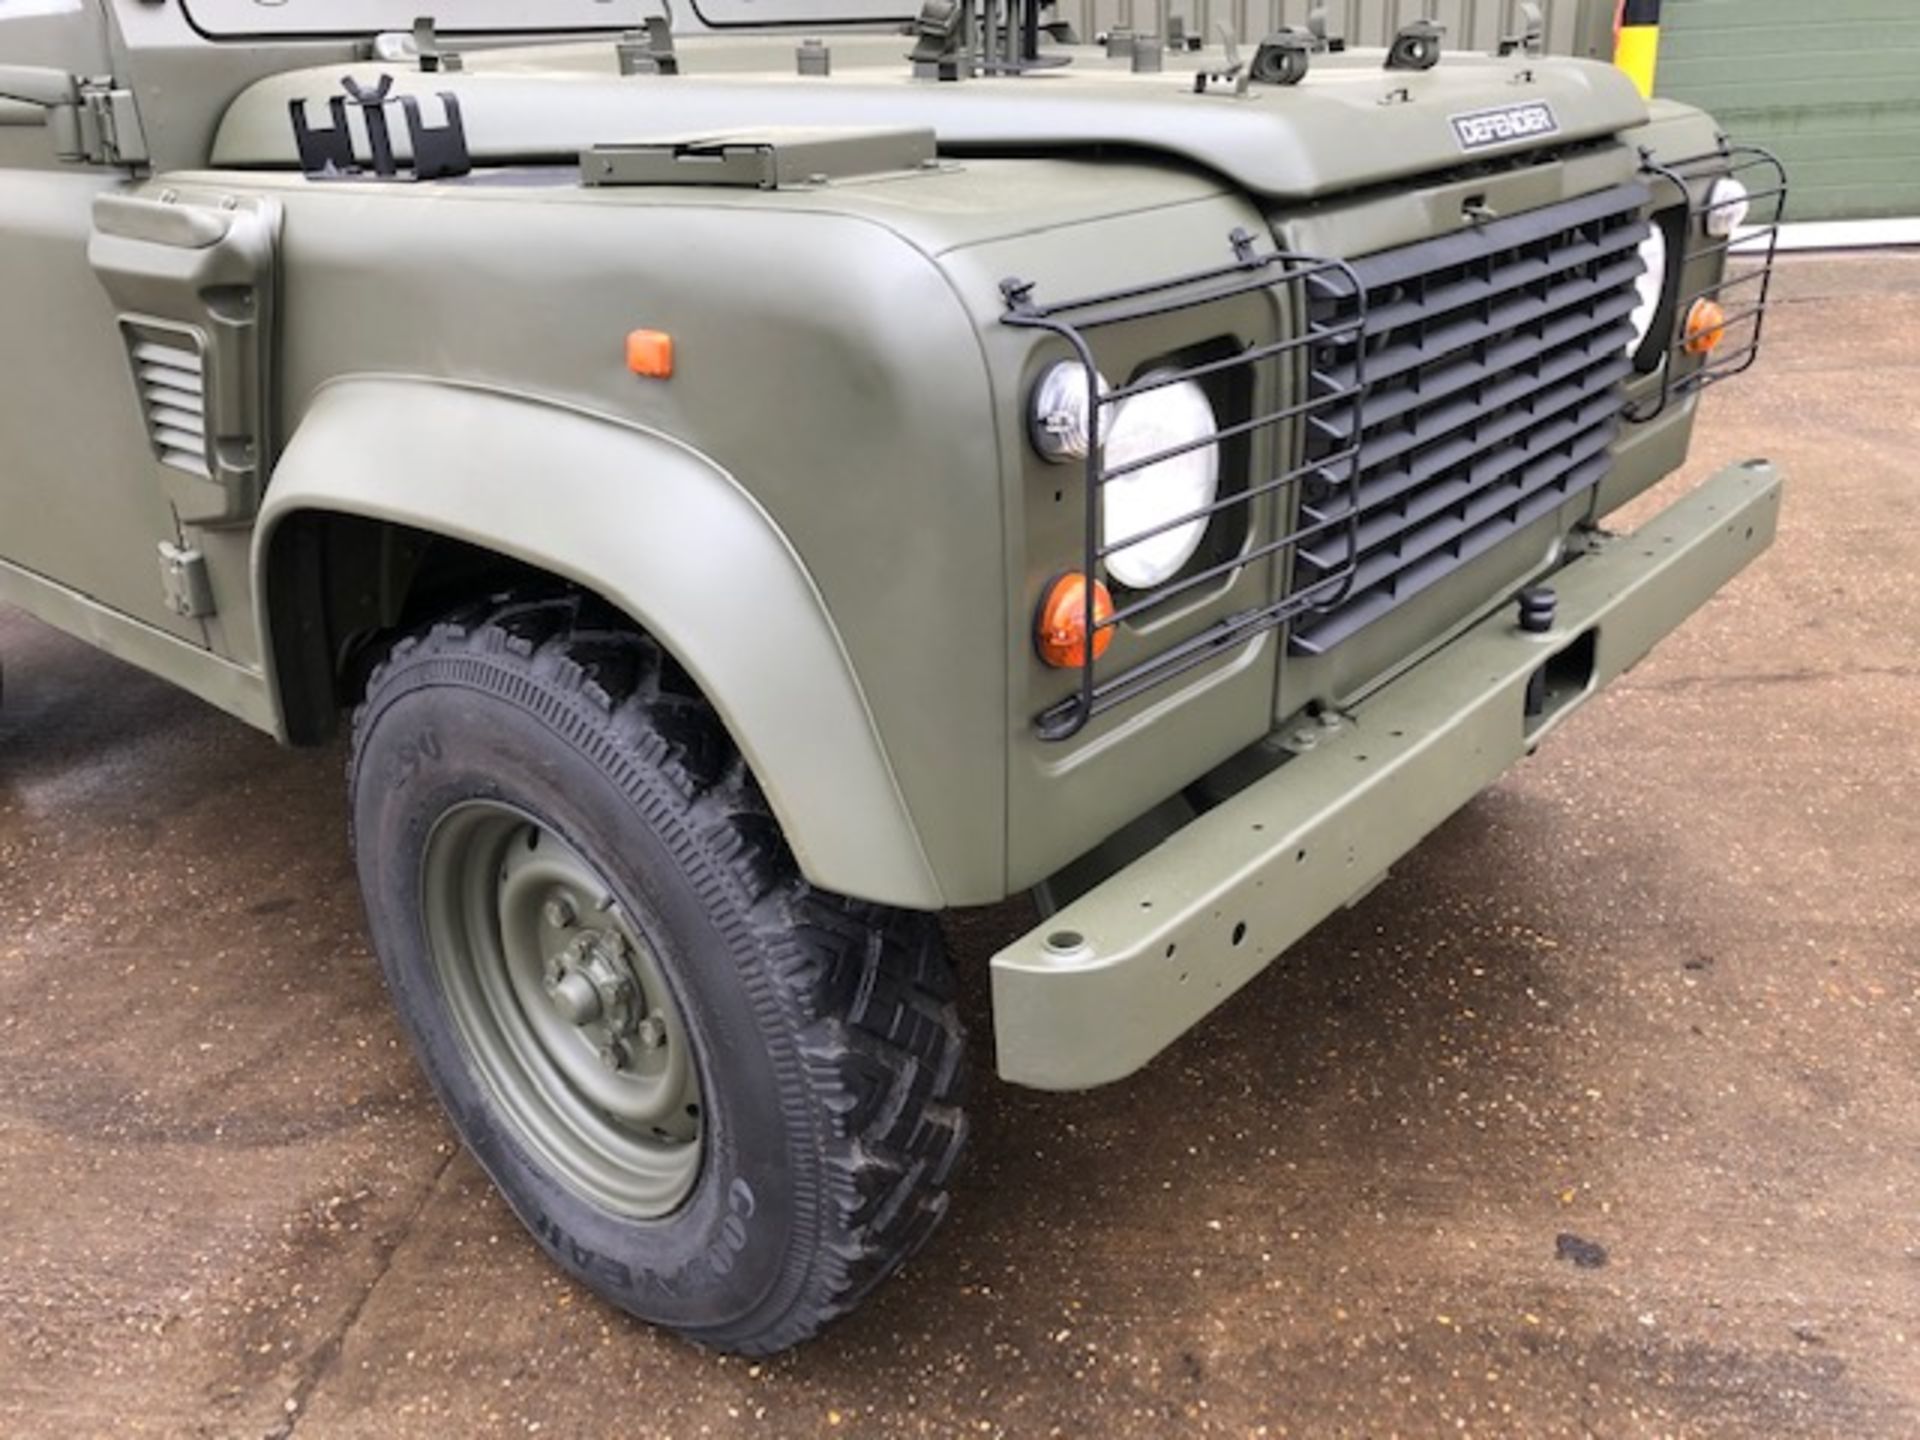 1998 Land Rover Wolf 90 Hard Top with Remus upgrade ONLY 73,650km - approx 45,000 miles! - Image 13 of 42